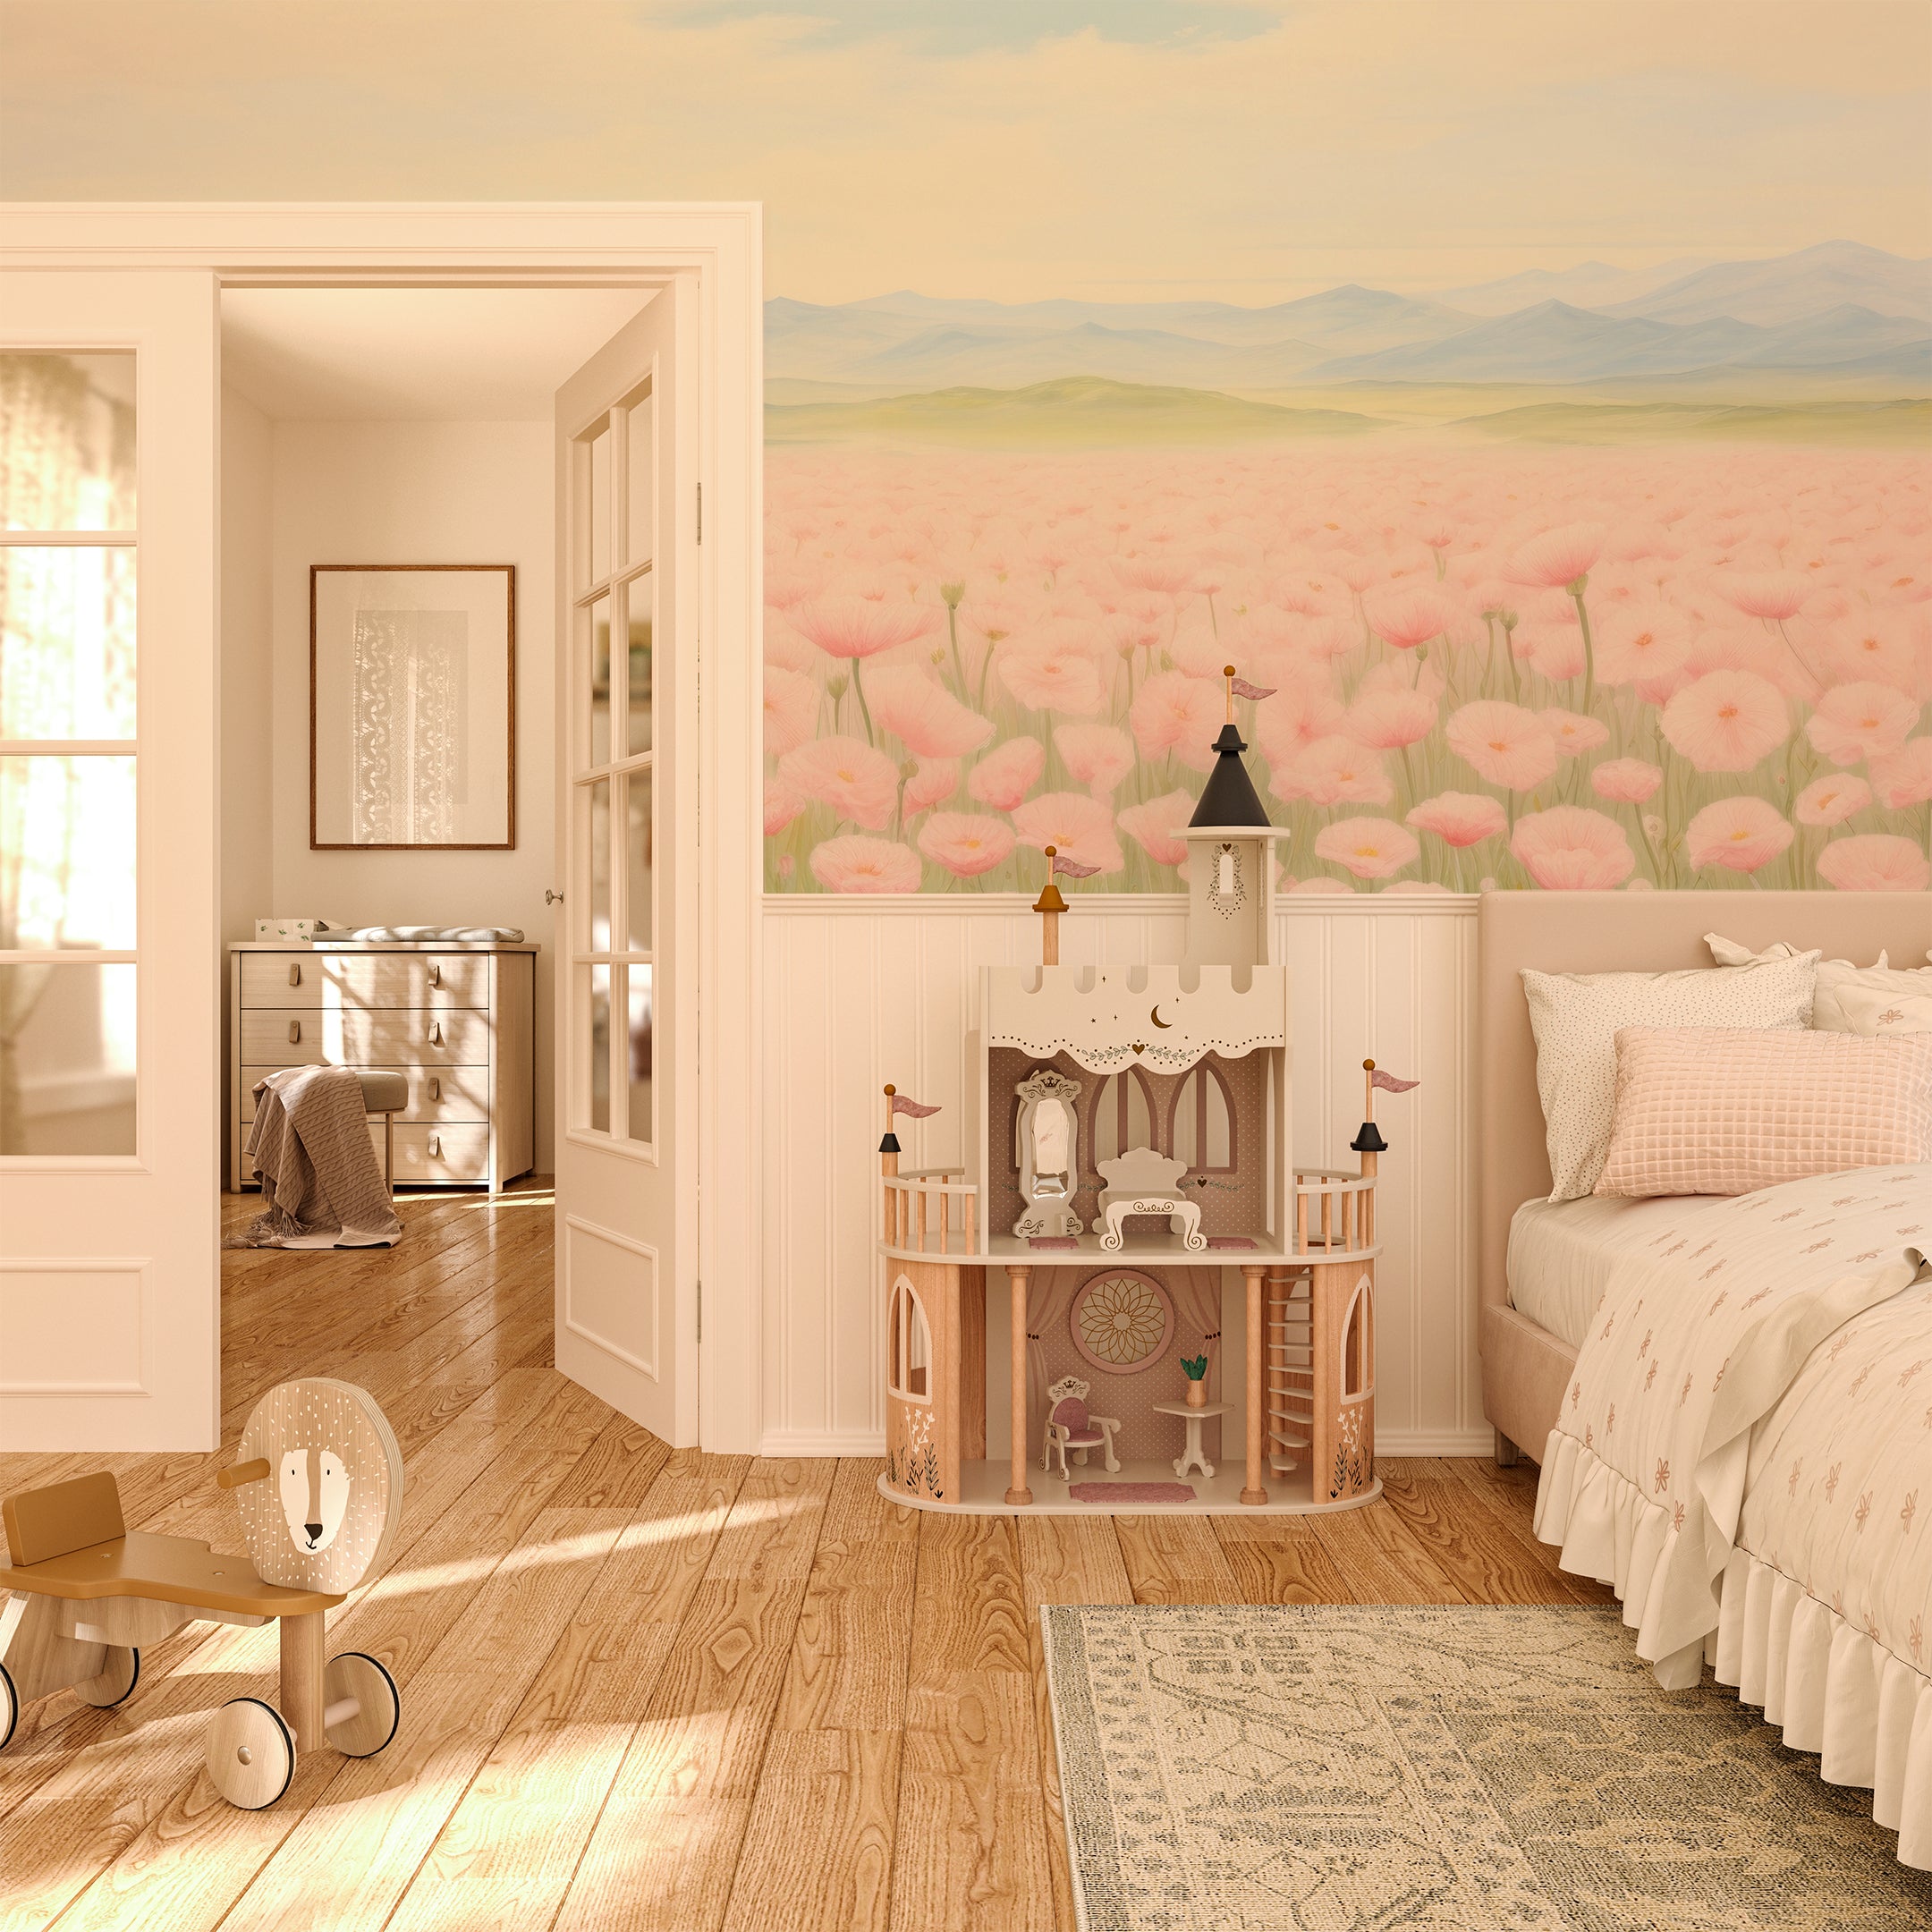 "Wallpaper mural of a tranquil meadow with pink flowers under a soft sky, ideal for relaxation spaces."\